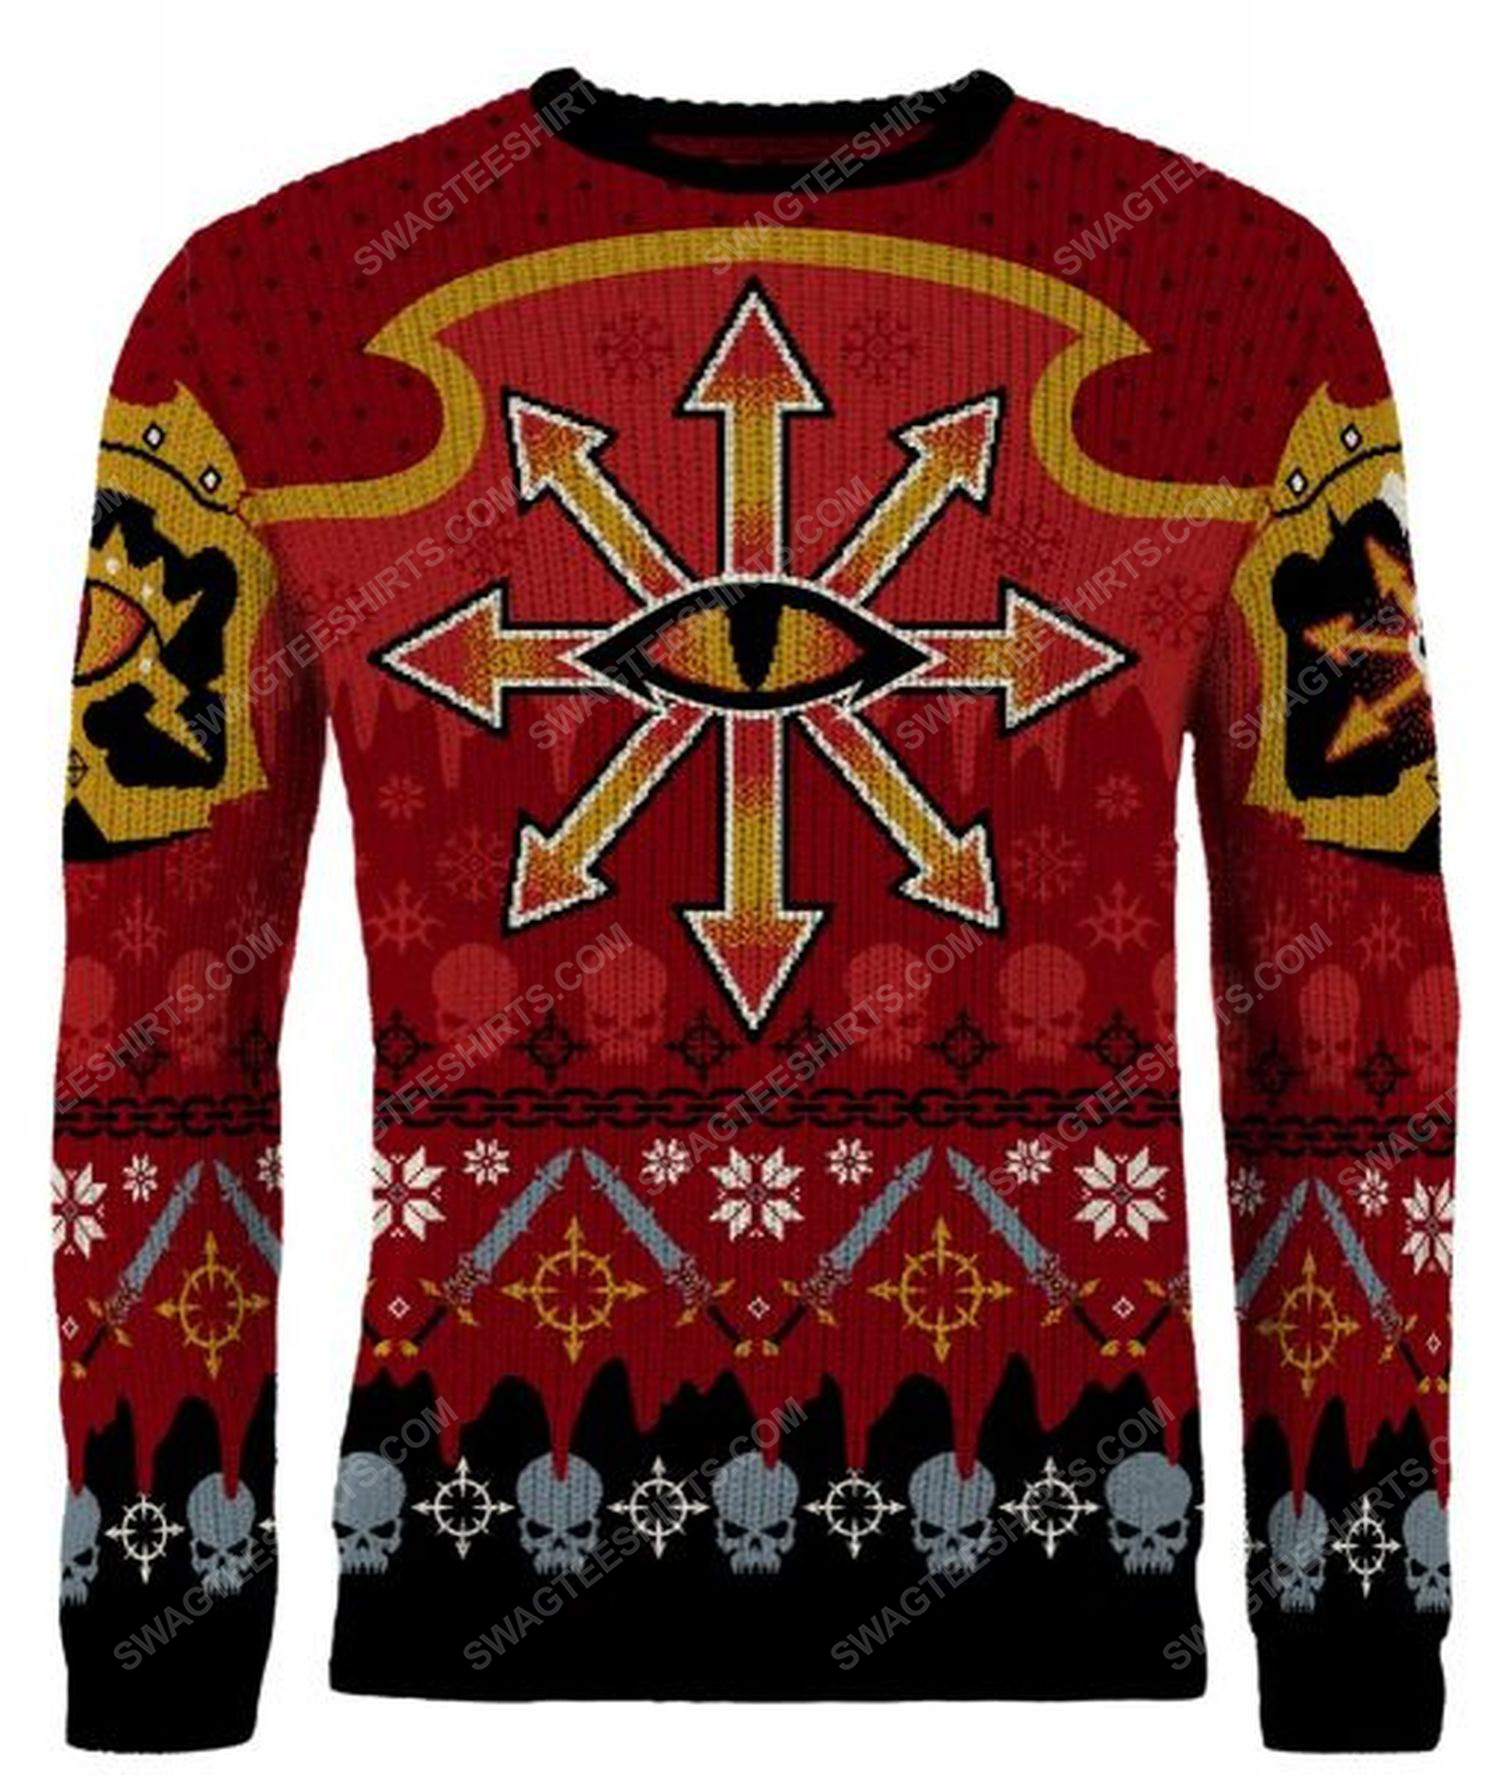 [special edition] Christmas holiday chaos reigns khorne full print ugly christmas sweater – maria